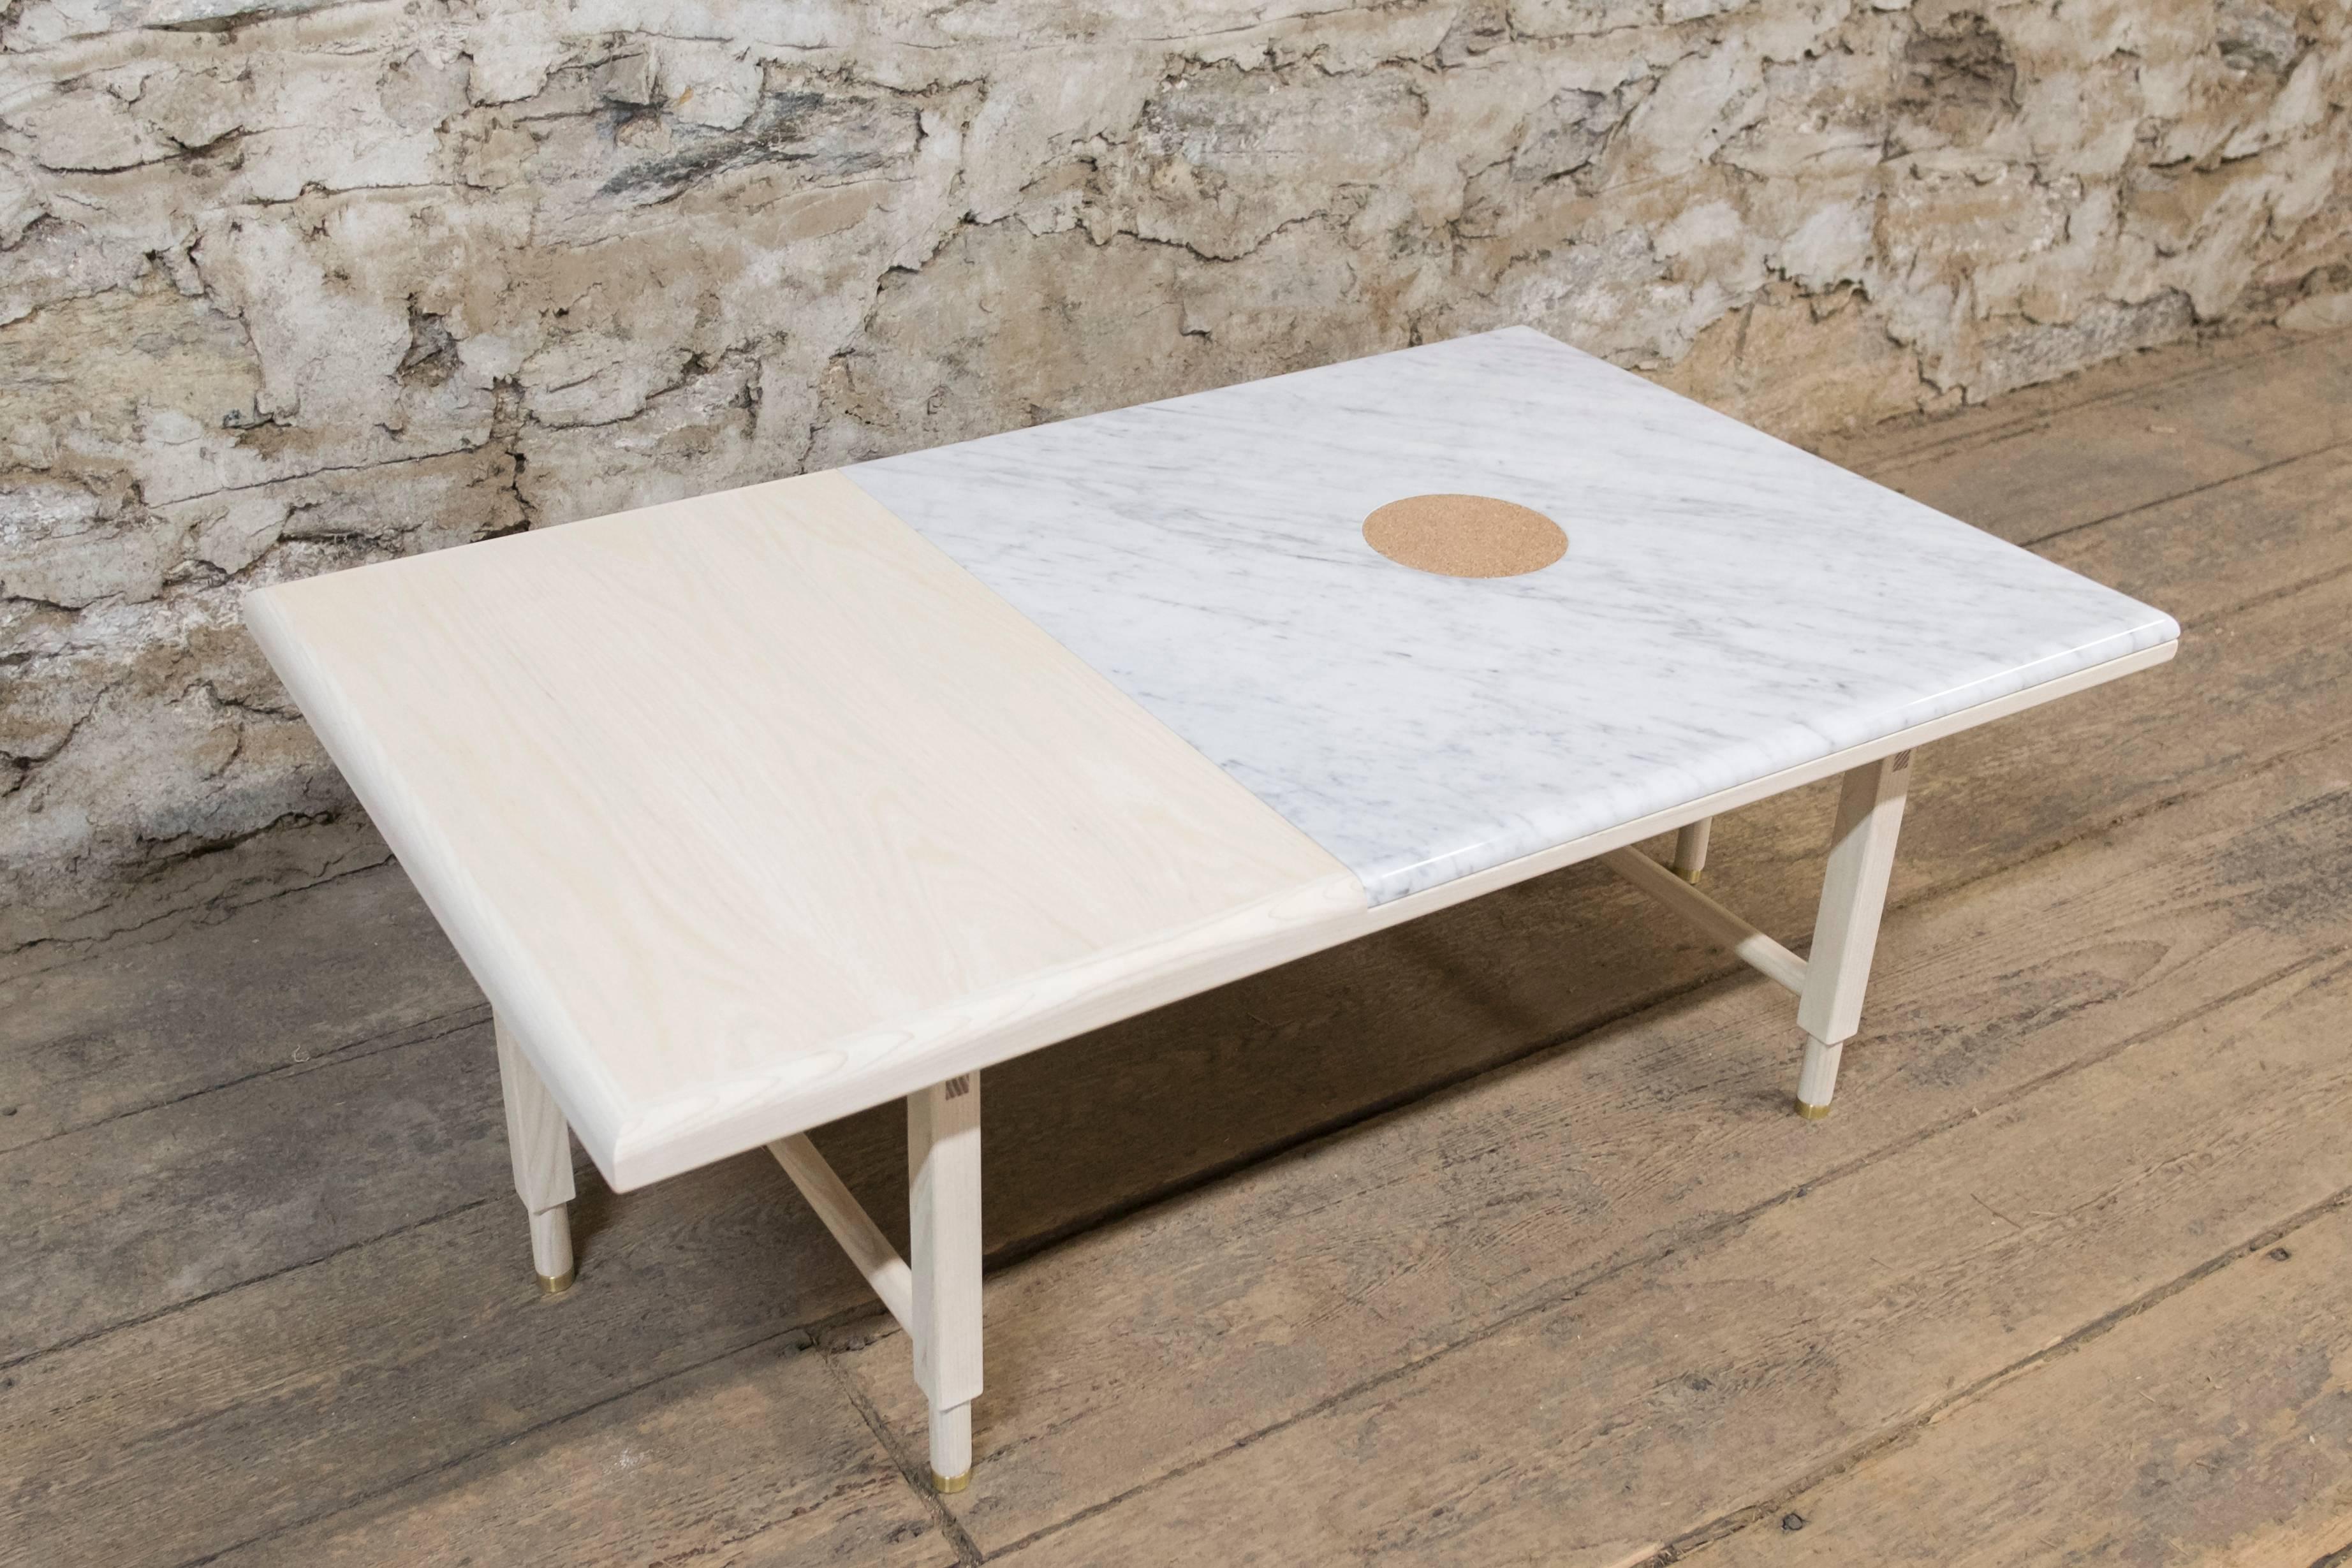 As Shown:
Bleached ash veneer with solid ash, marble and inset cork.
Flat waterborne finish.
Dimensions: 15.5” H x 46” W x 28” D.
Custom sizing available.
Offered in a variety of woods and finishes.